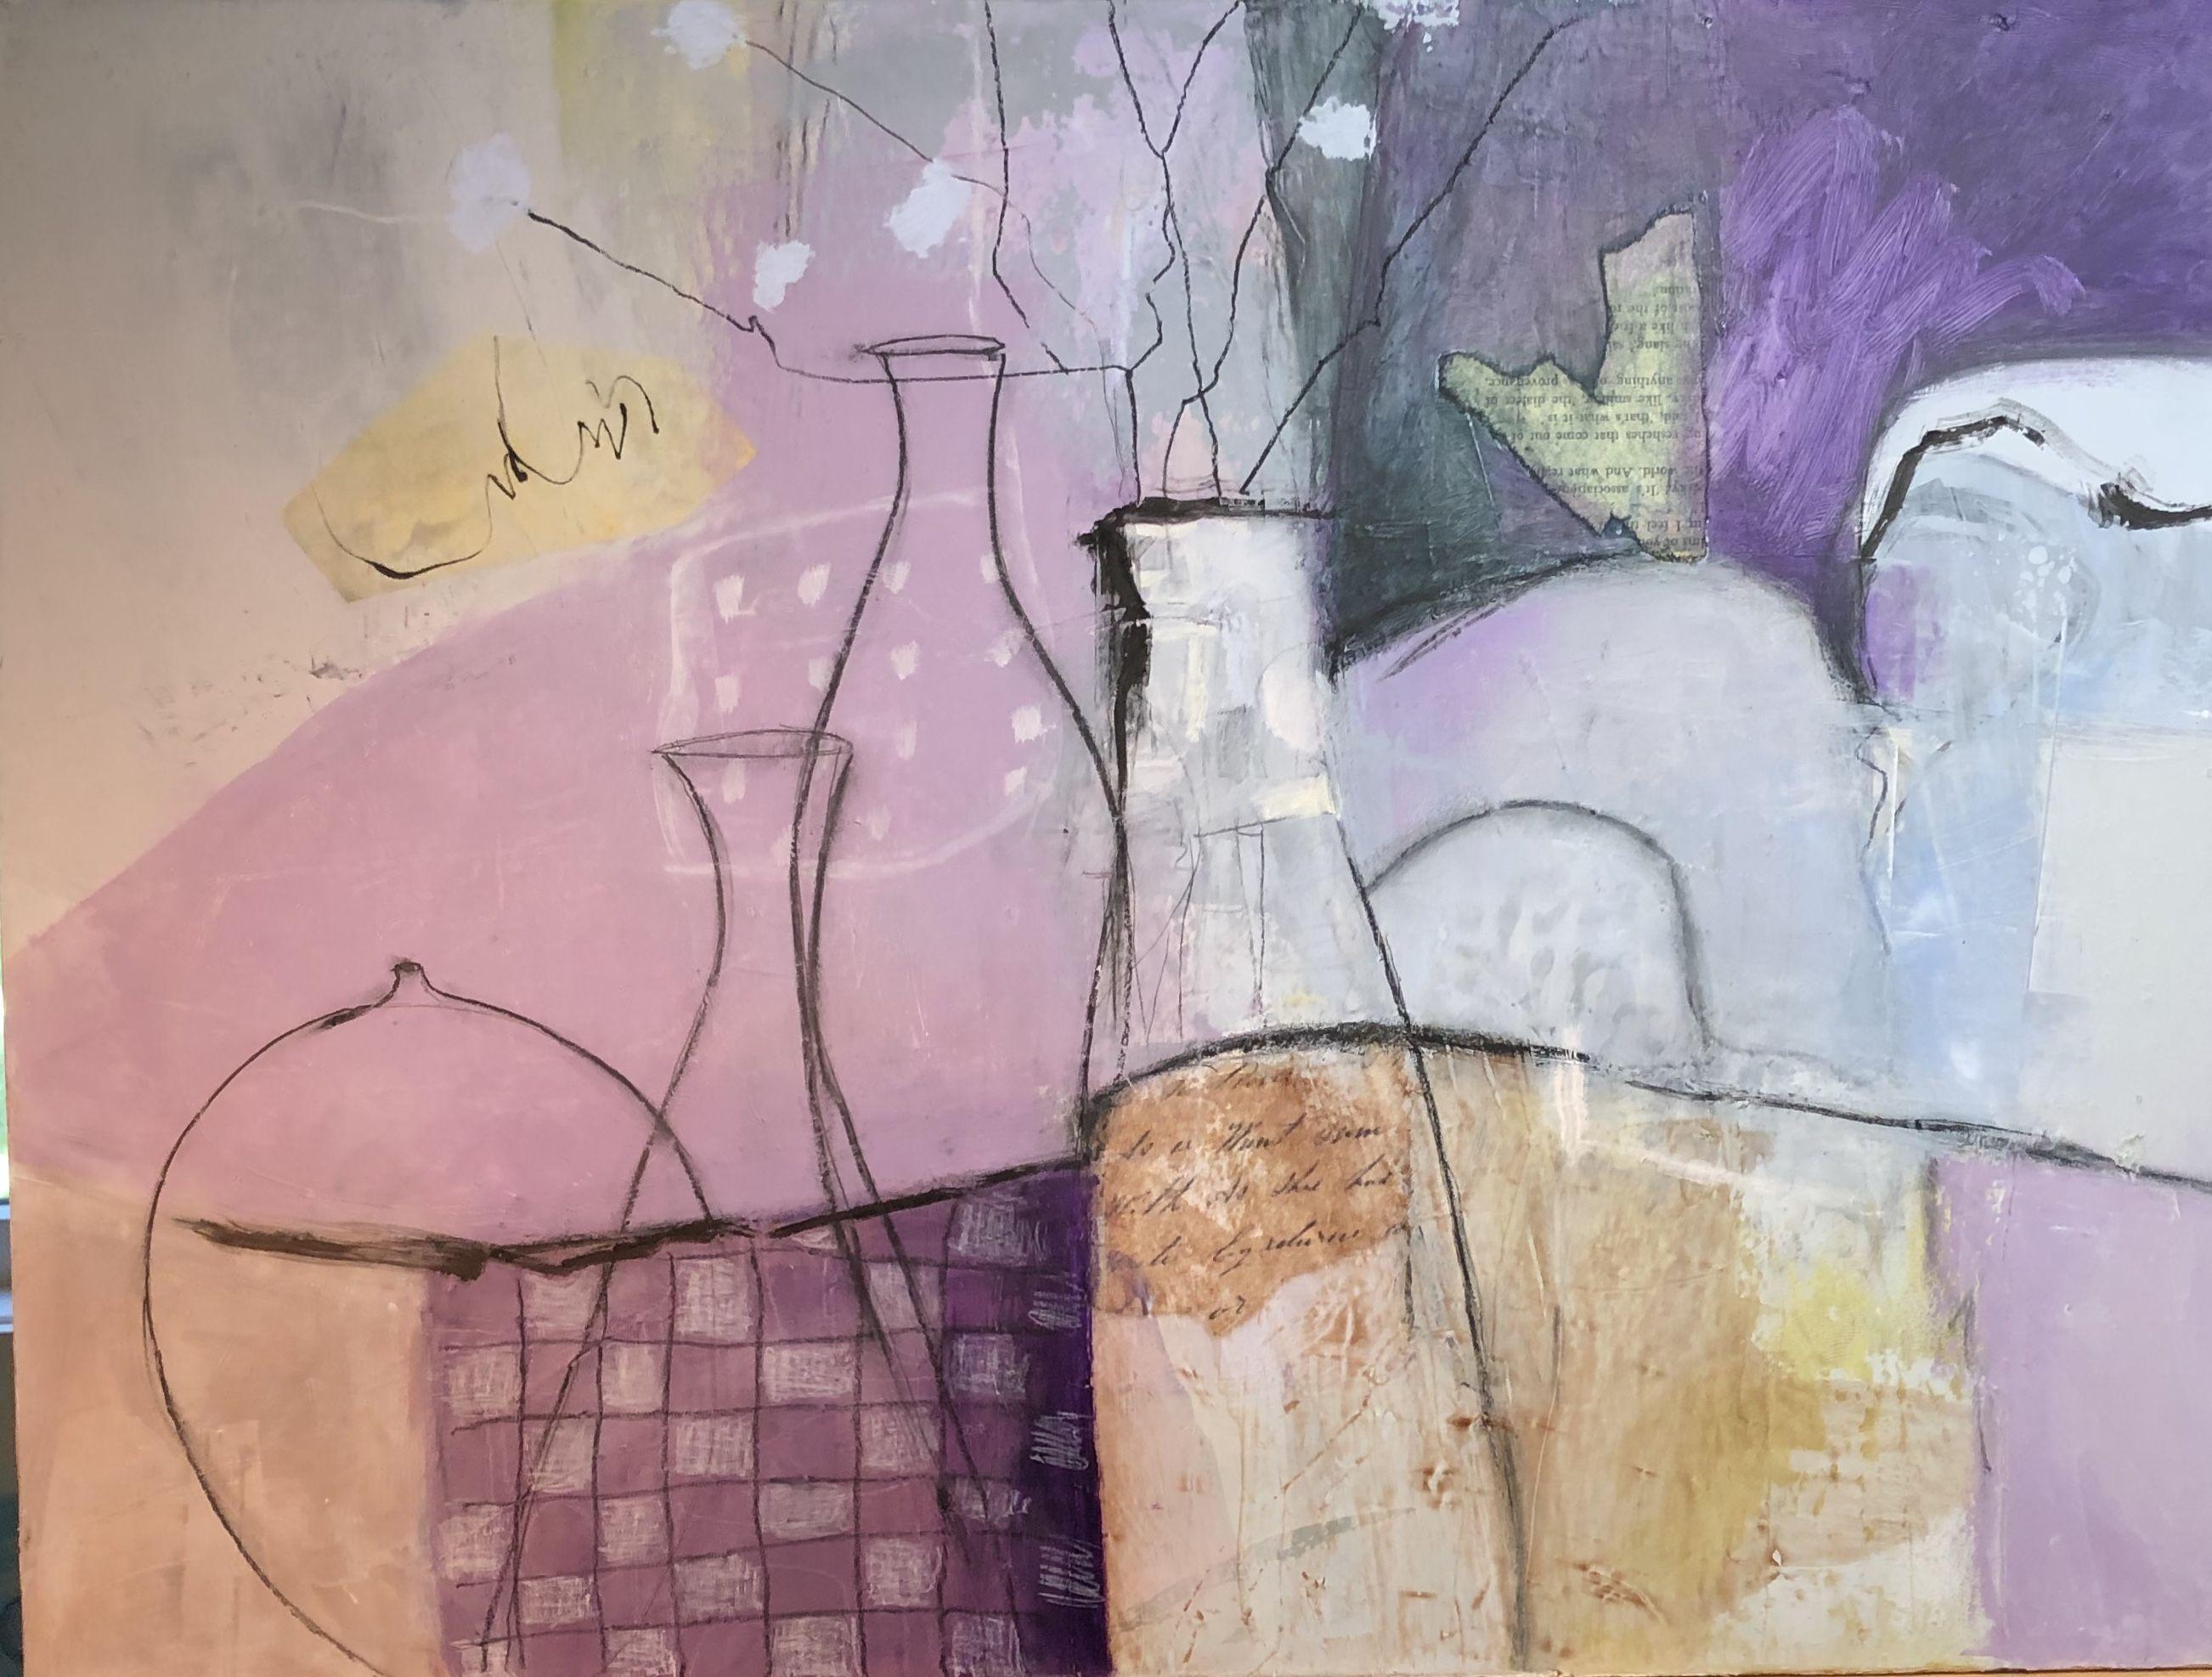 Letty Oratowski Abstract Painting - Bottles, Painting, Oil on Canvas